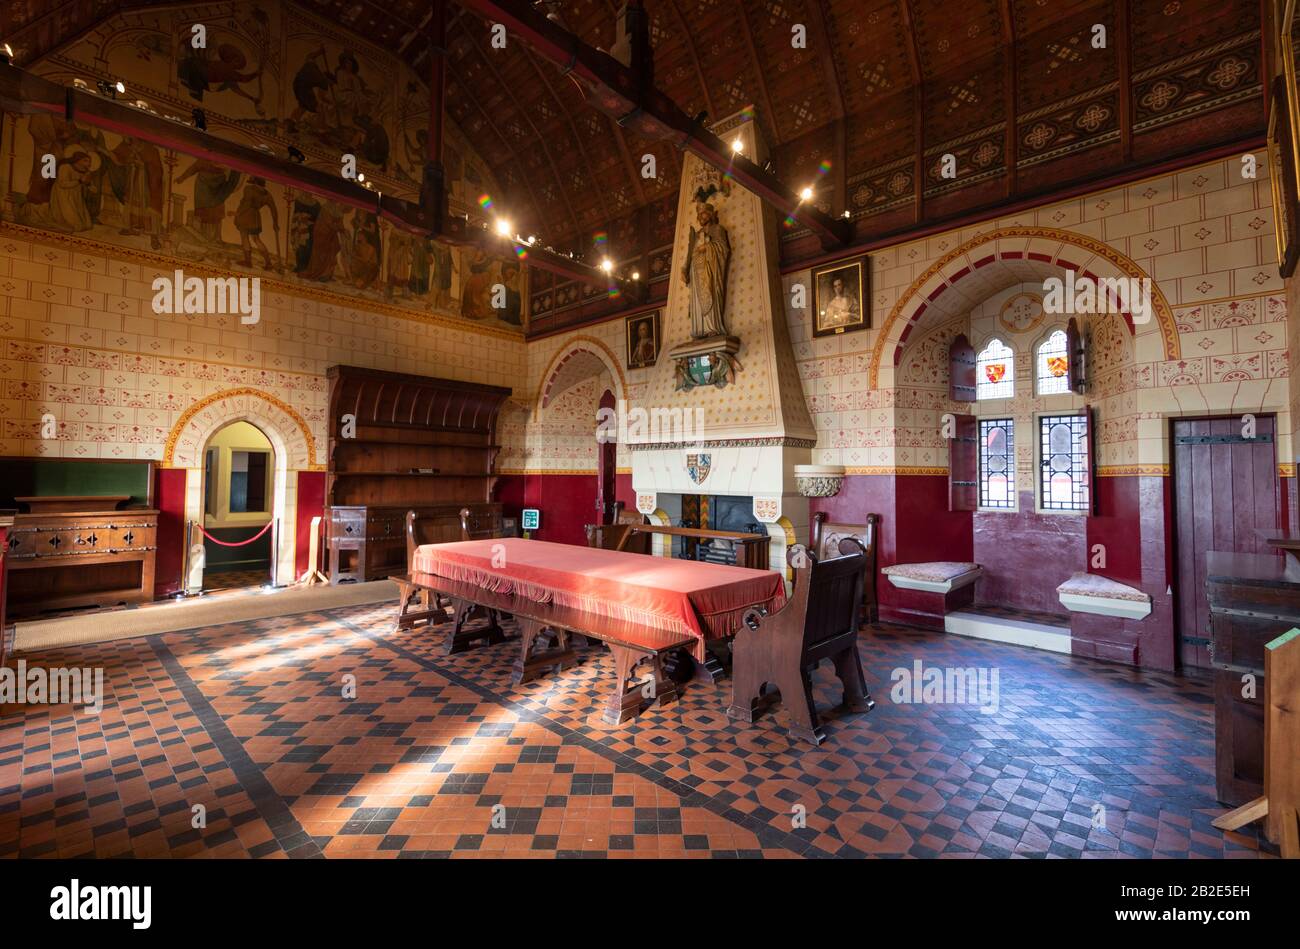 The Banqueting Hall at Castell Coch (Red castle), Tongwynlais, Wales Stock Photo